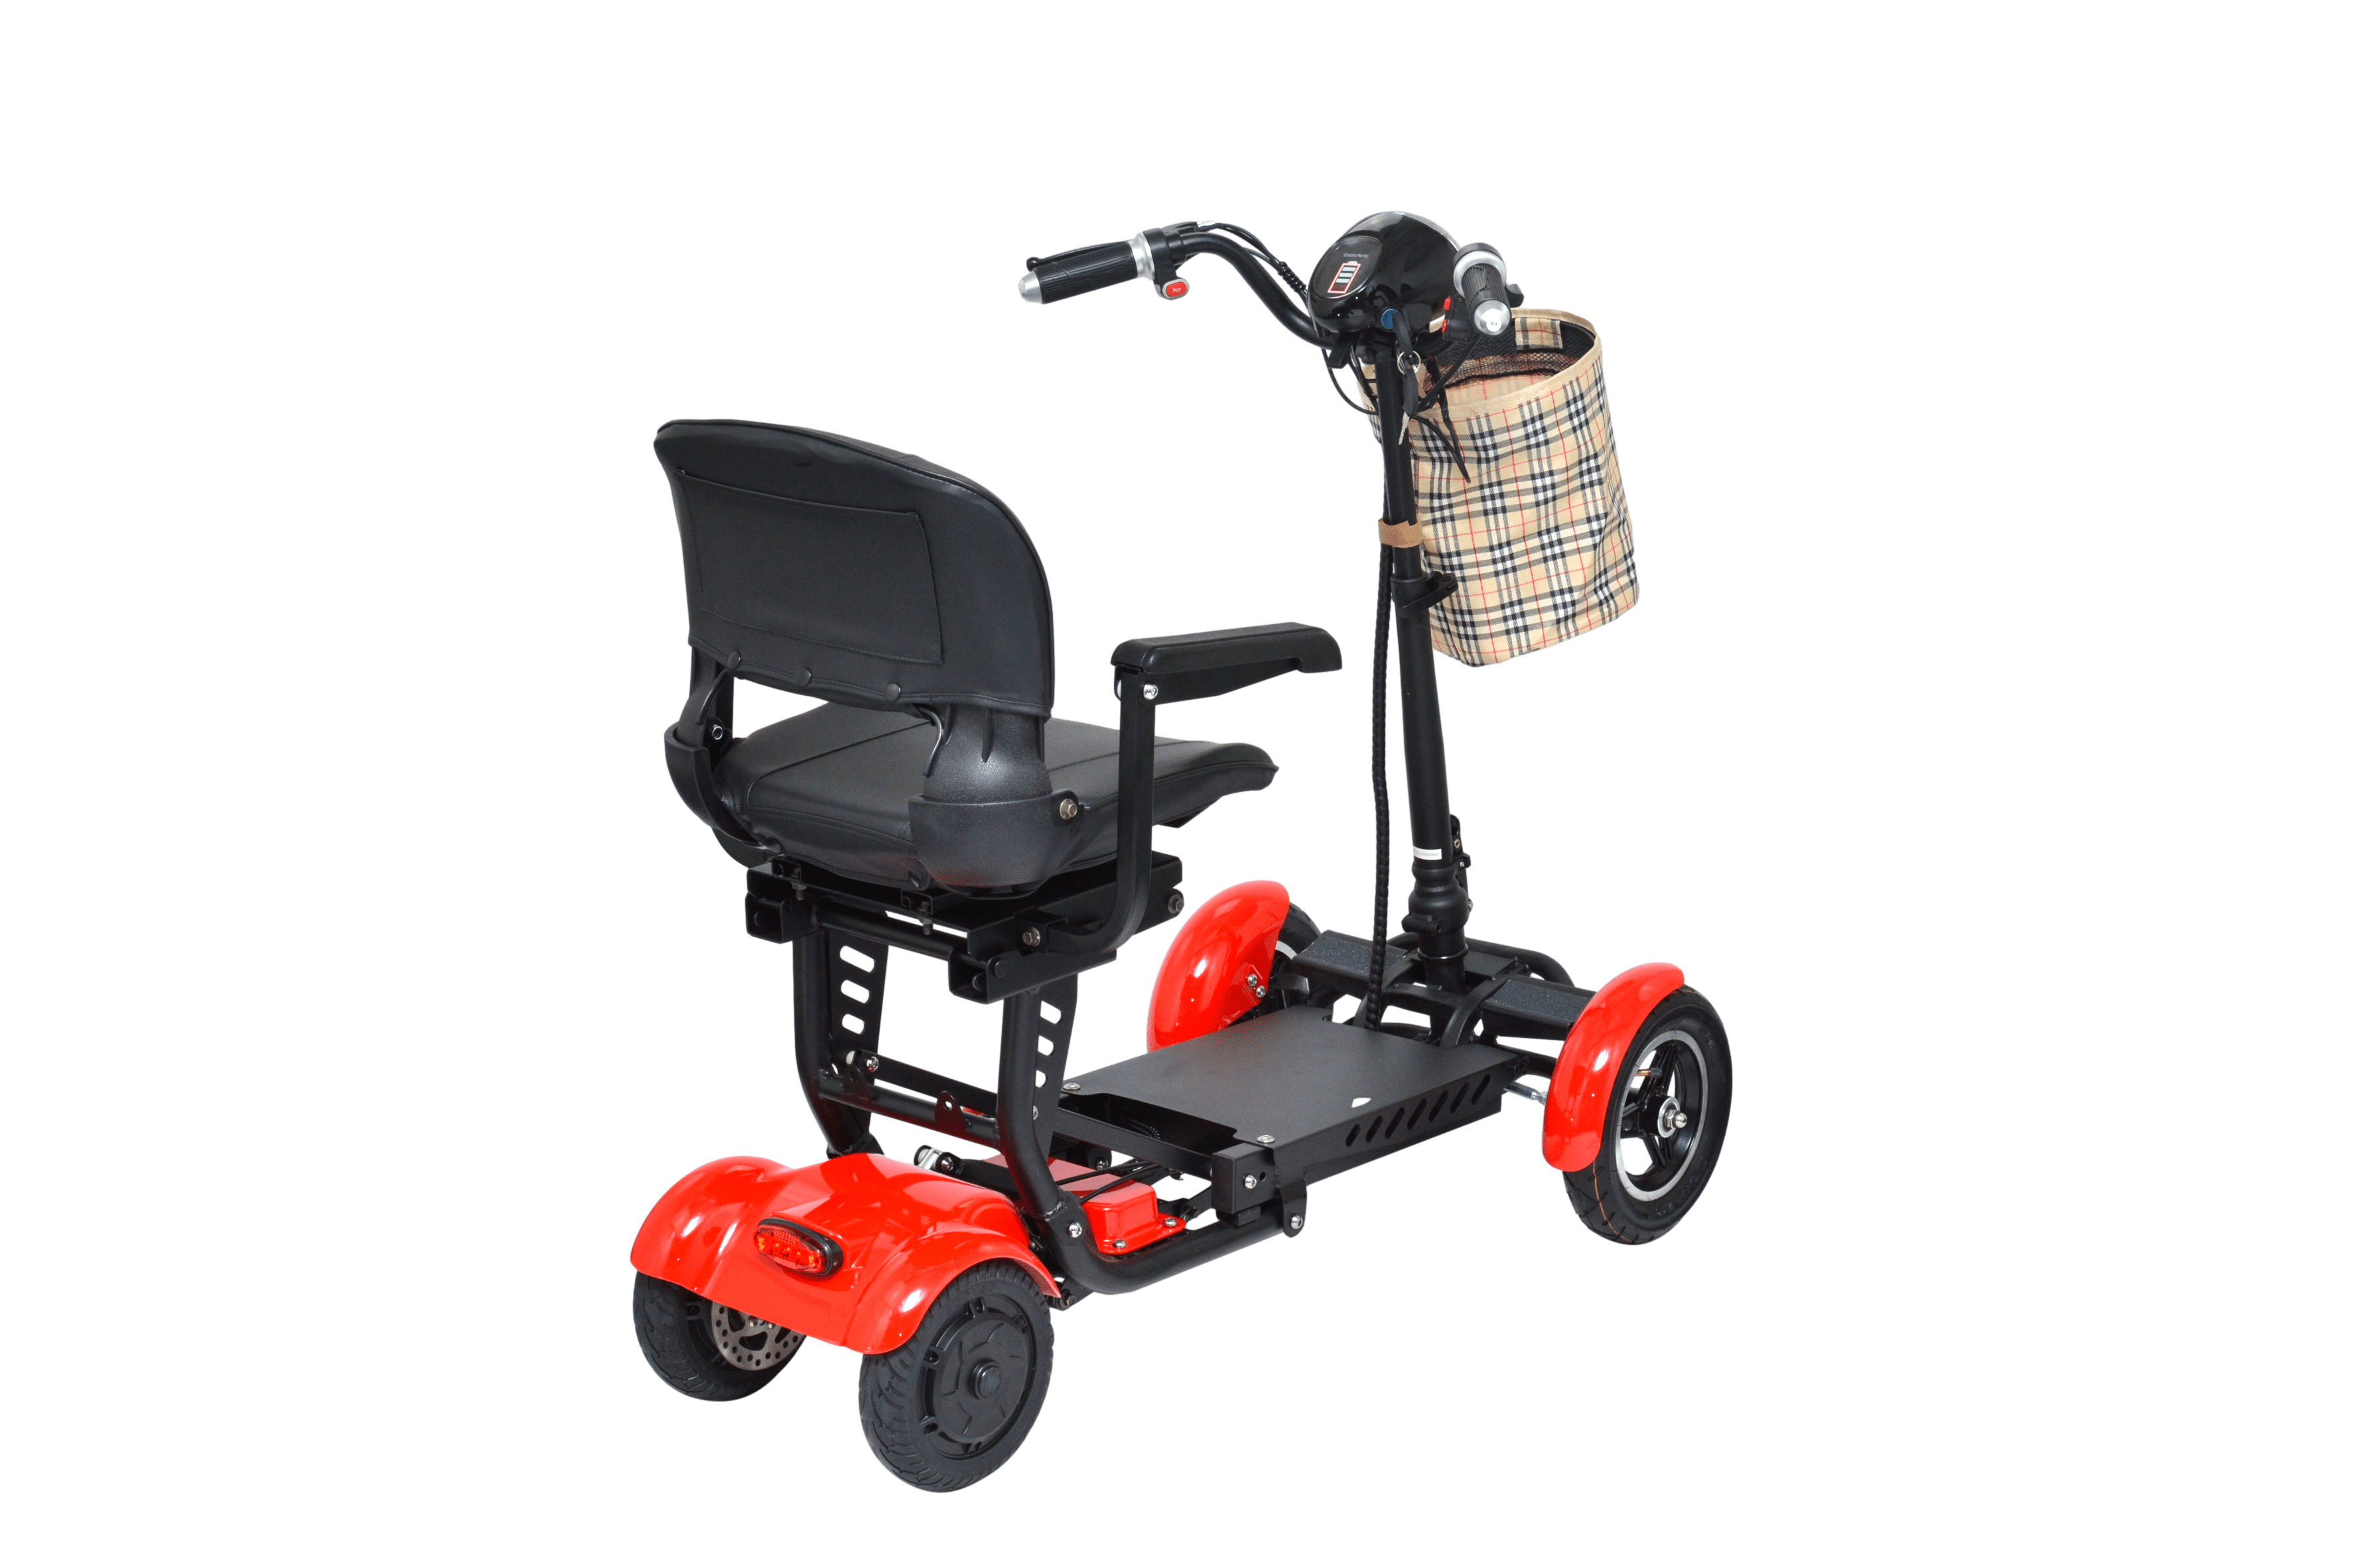 Outdoor Comfortable Mobile Wheelchair Displacement Machine Aluminum Alloy,  Fold Light Travel Portable Self-propelled Elderly/Disabled Scooter